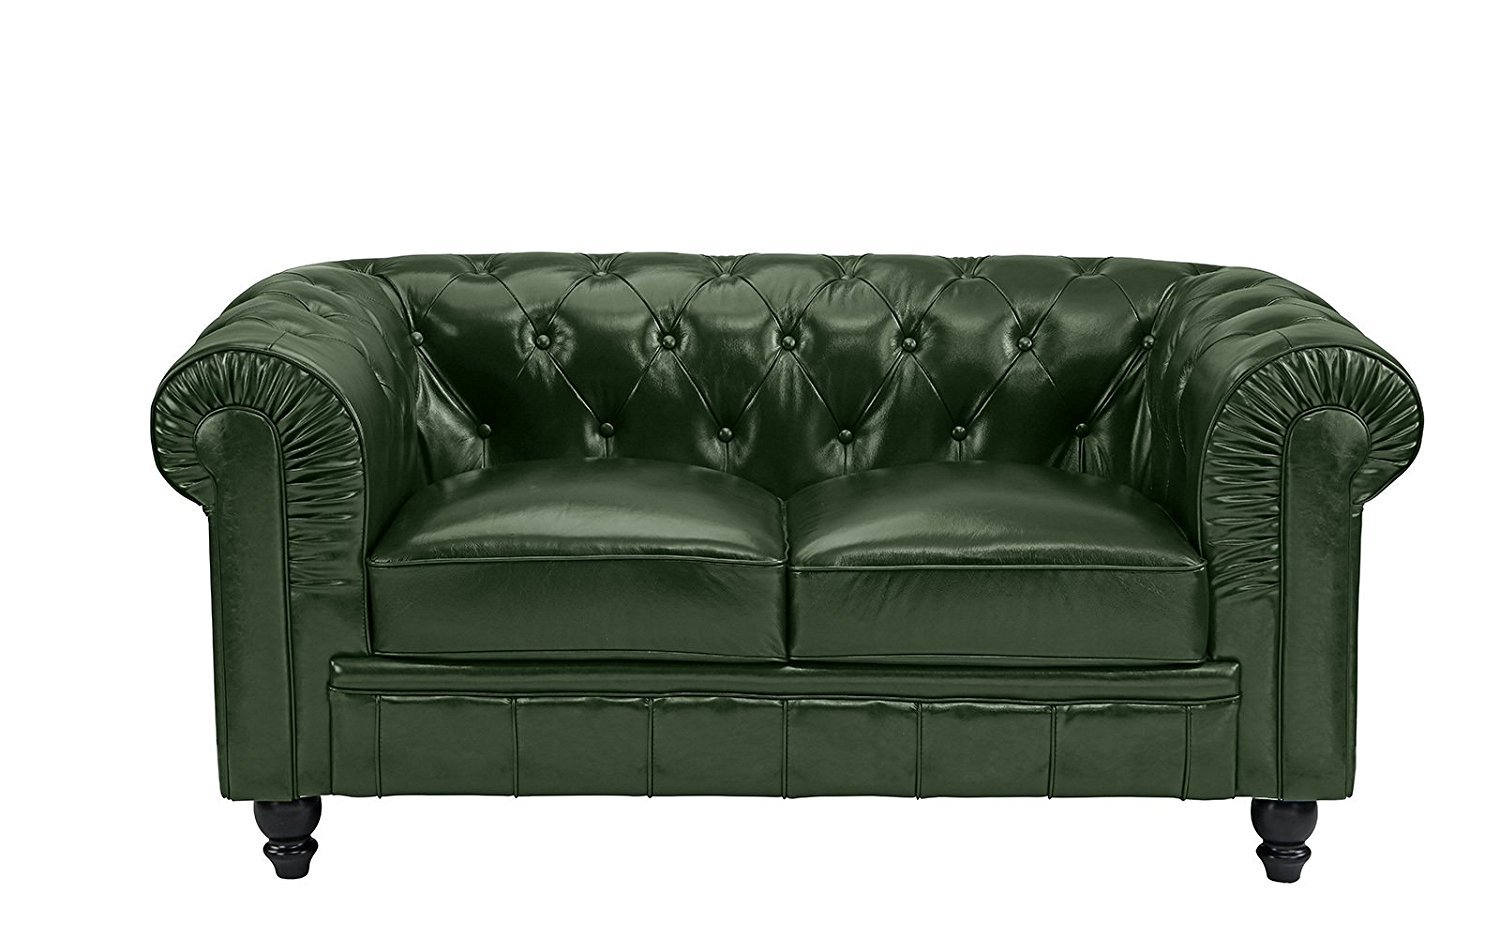 Classic Scroll Arm Leather Match Chesterfield Love Seat ...